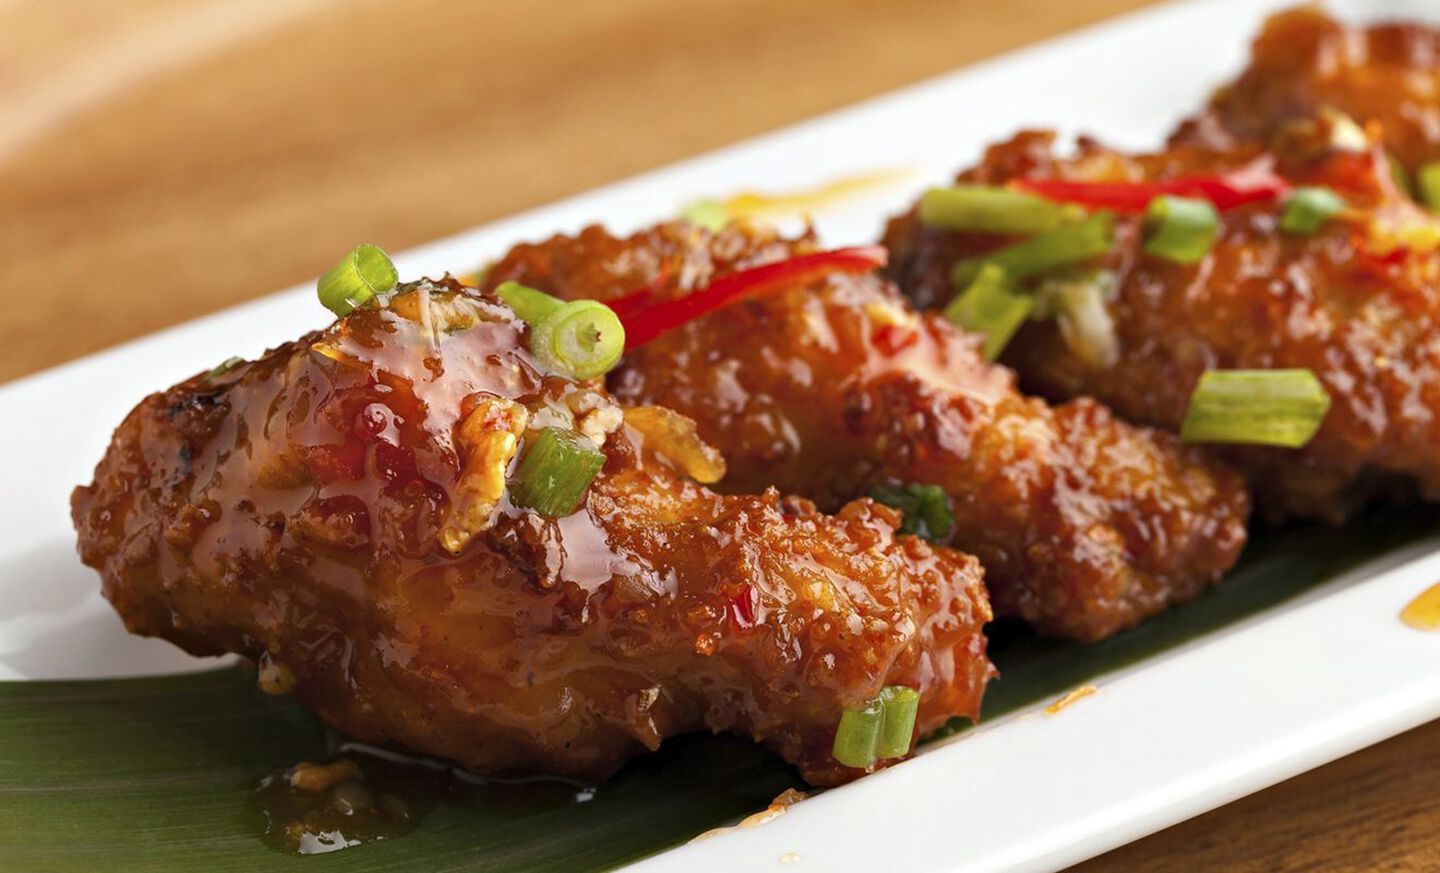 Easy recipe for spicy sweet Asian-style fried chicken wings. D'Artagnan